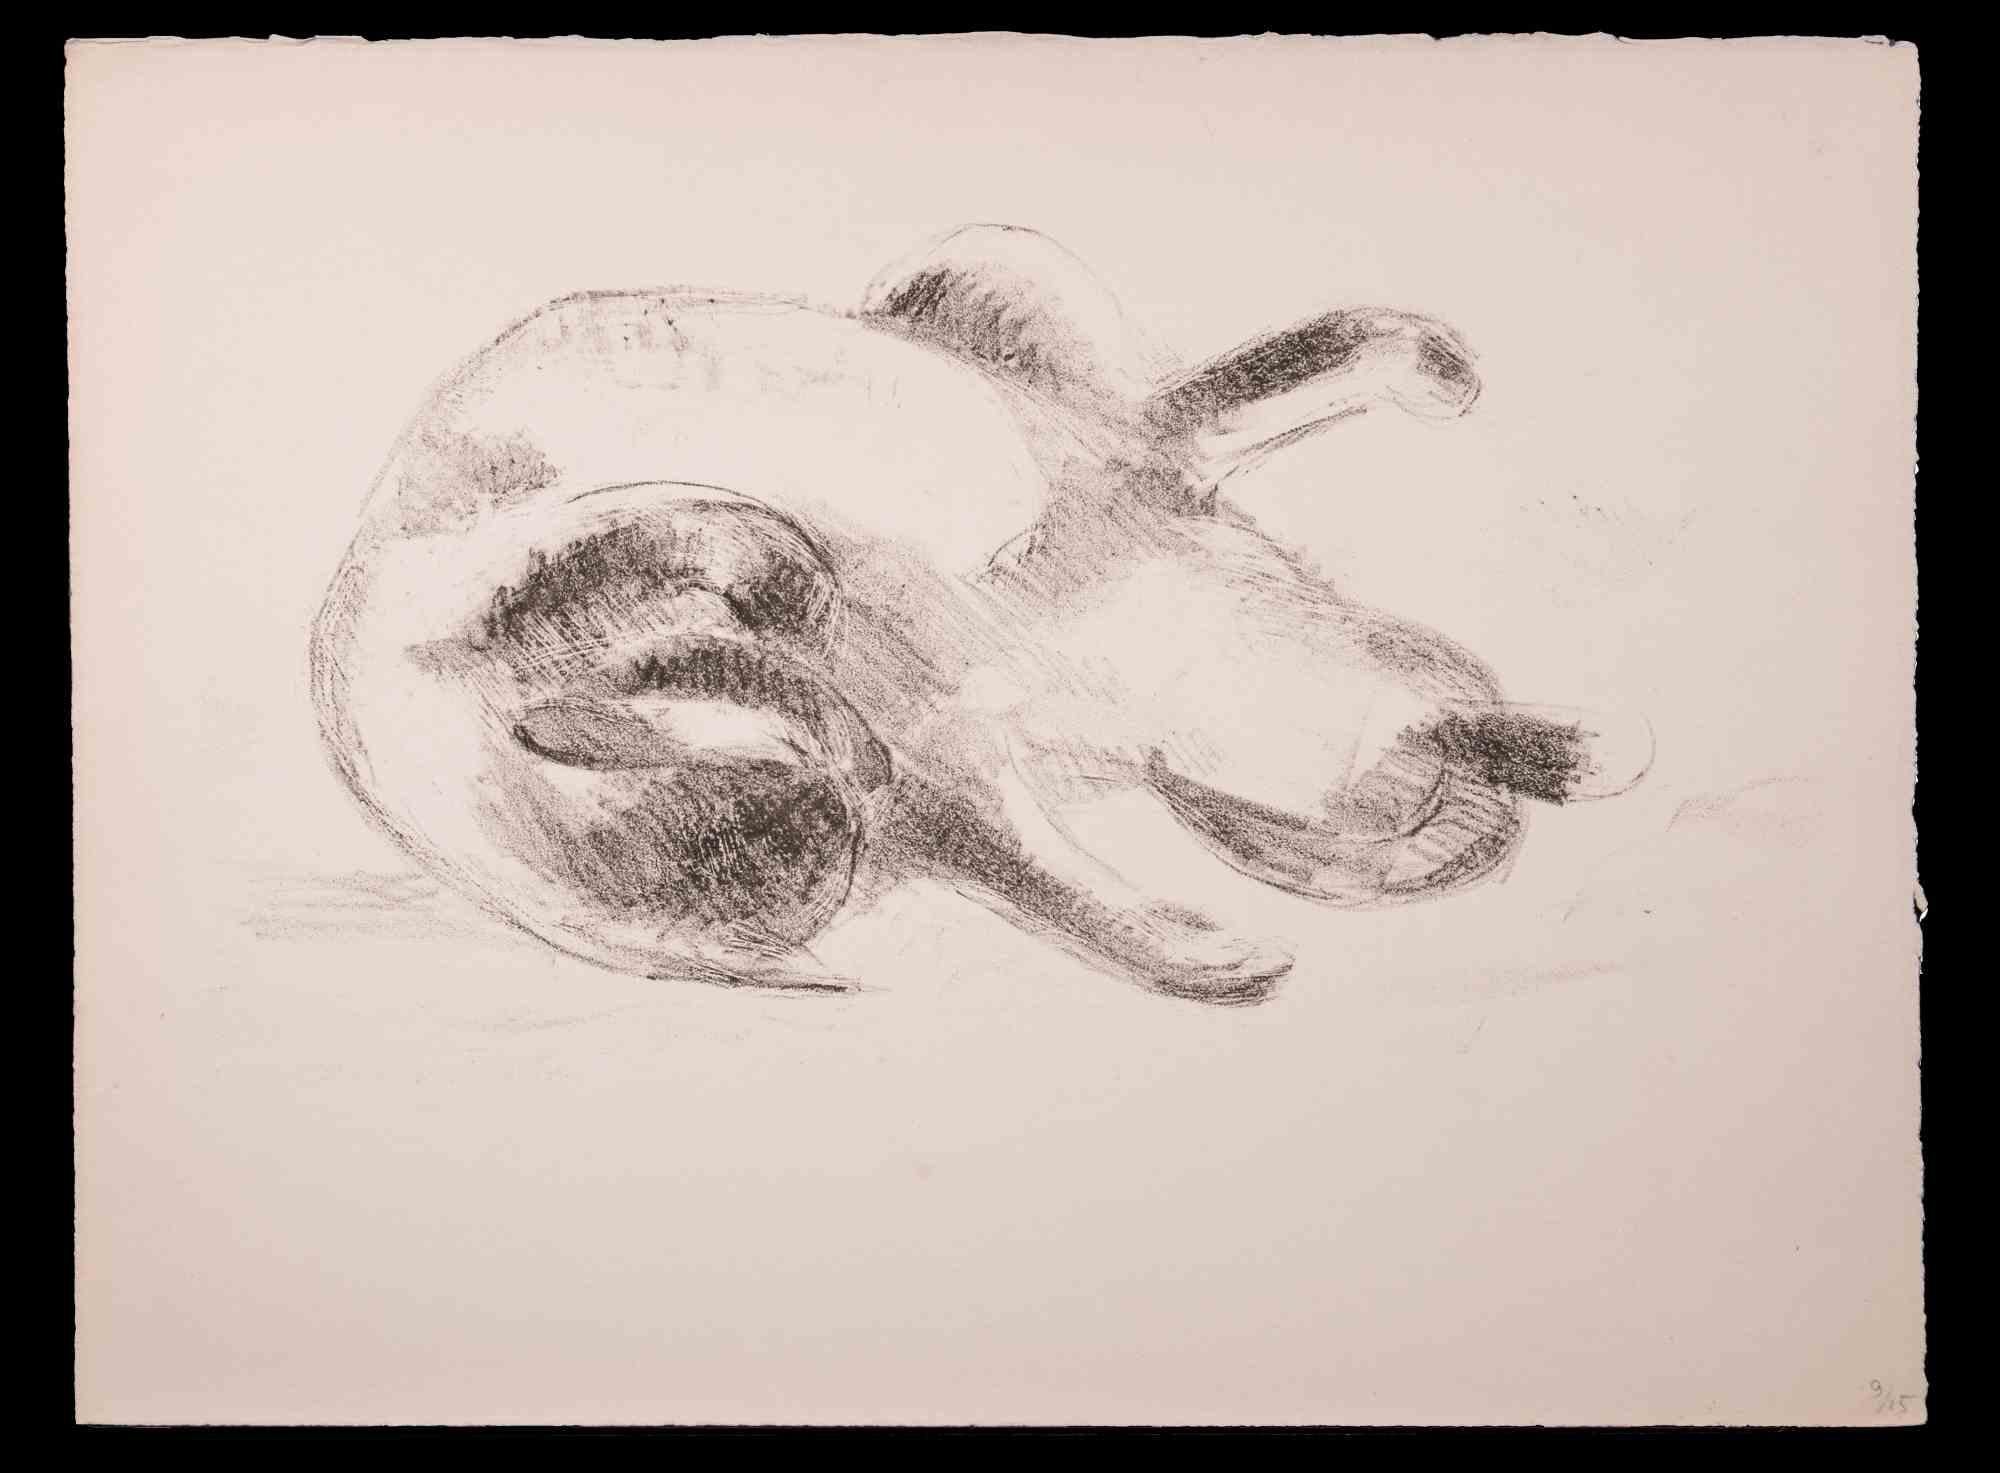 Cat is an Original Drawing in Charcoal realized by Giselle Halff (1899-1971).

Good conditions.

Giselle Halff (1899-1971) born in Hanoi, student of R.X. Prinet, R. Ménard, L. Simon, B. Boutet de Monvel. Animal painter and draughtsman.